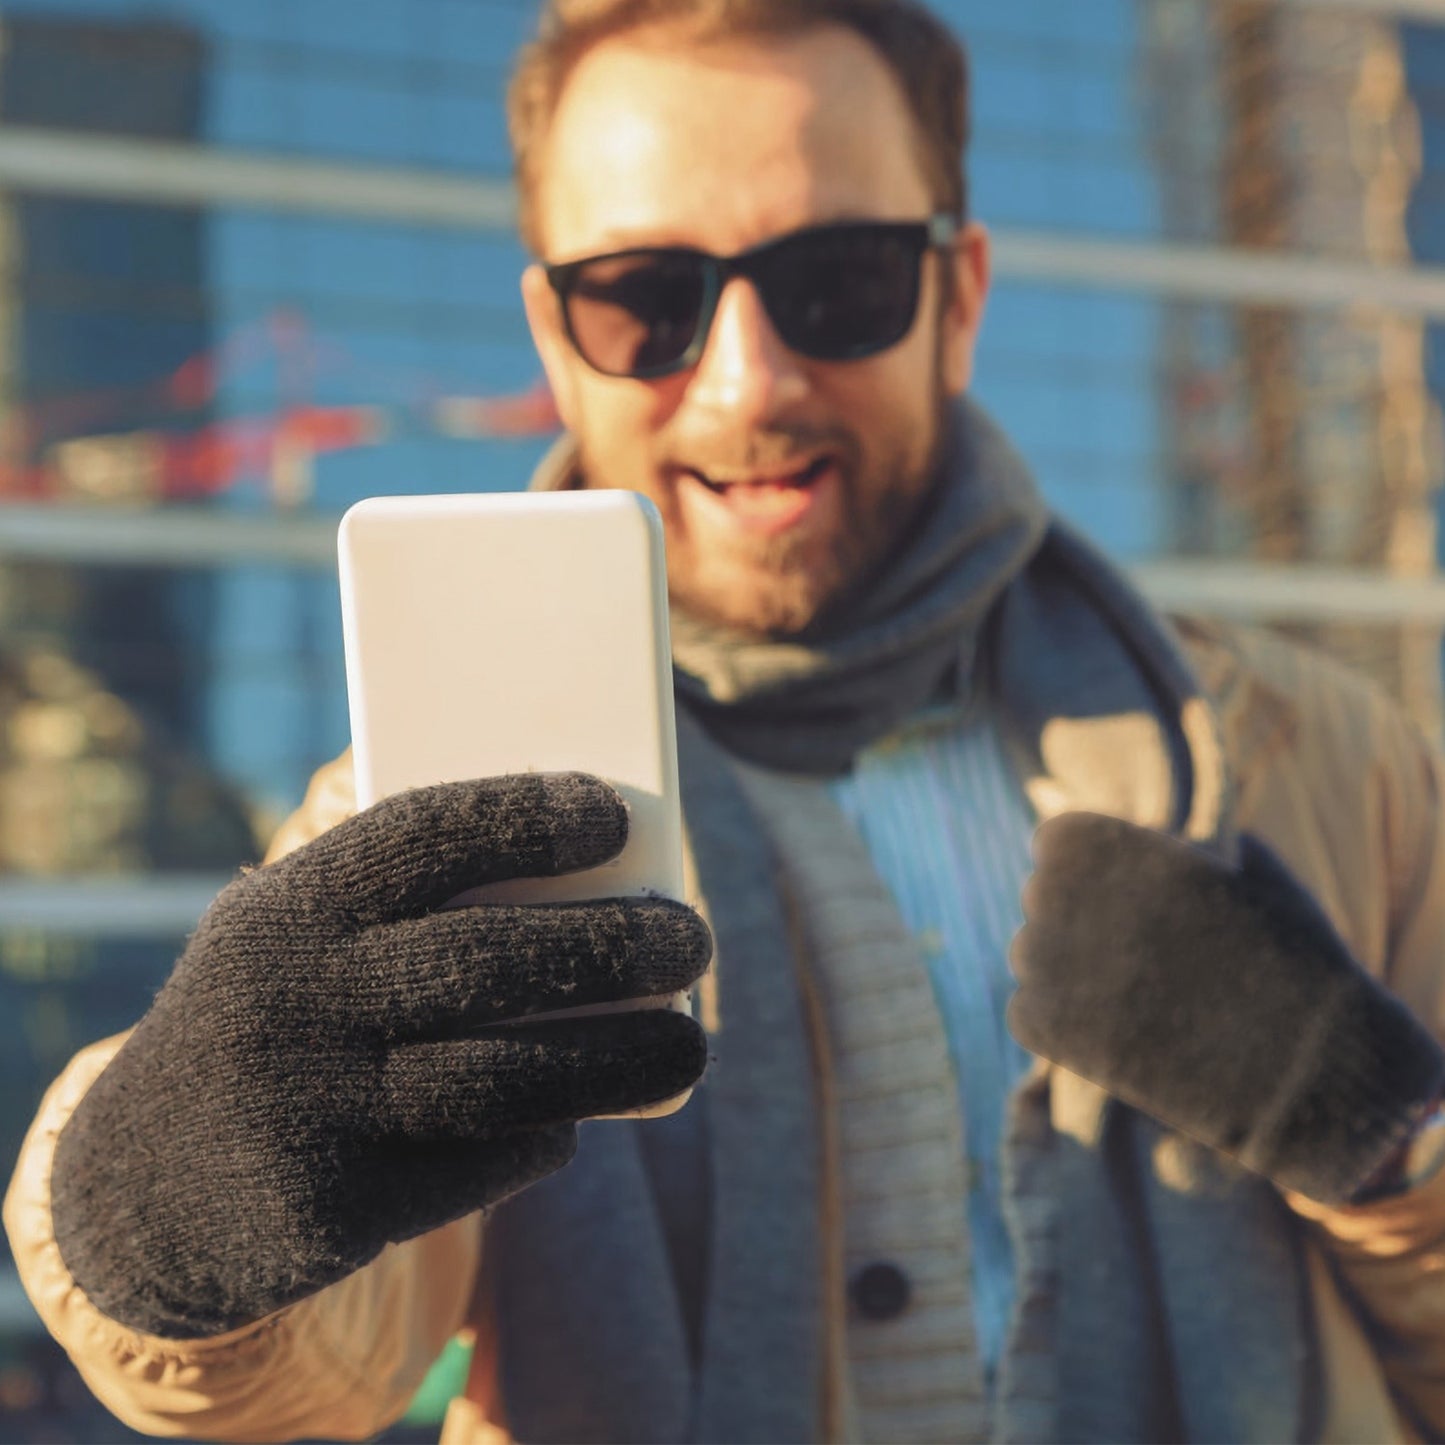 Unisex Touch Screen Gloves